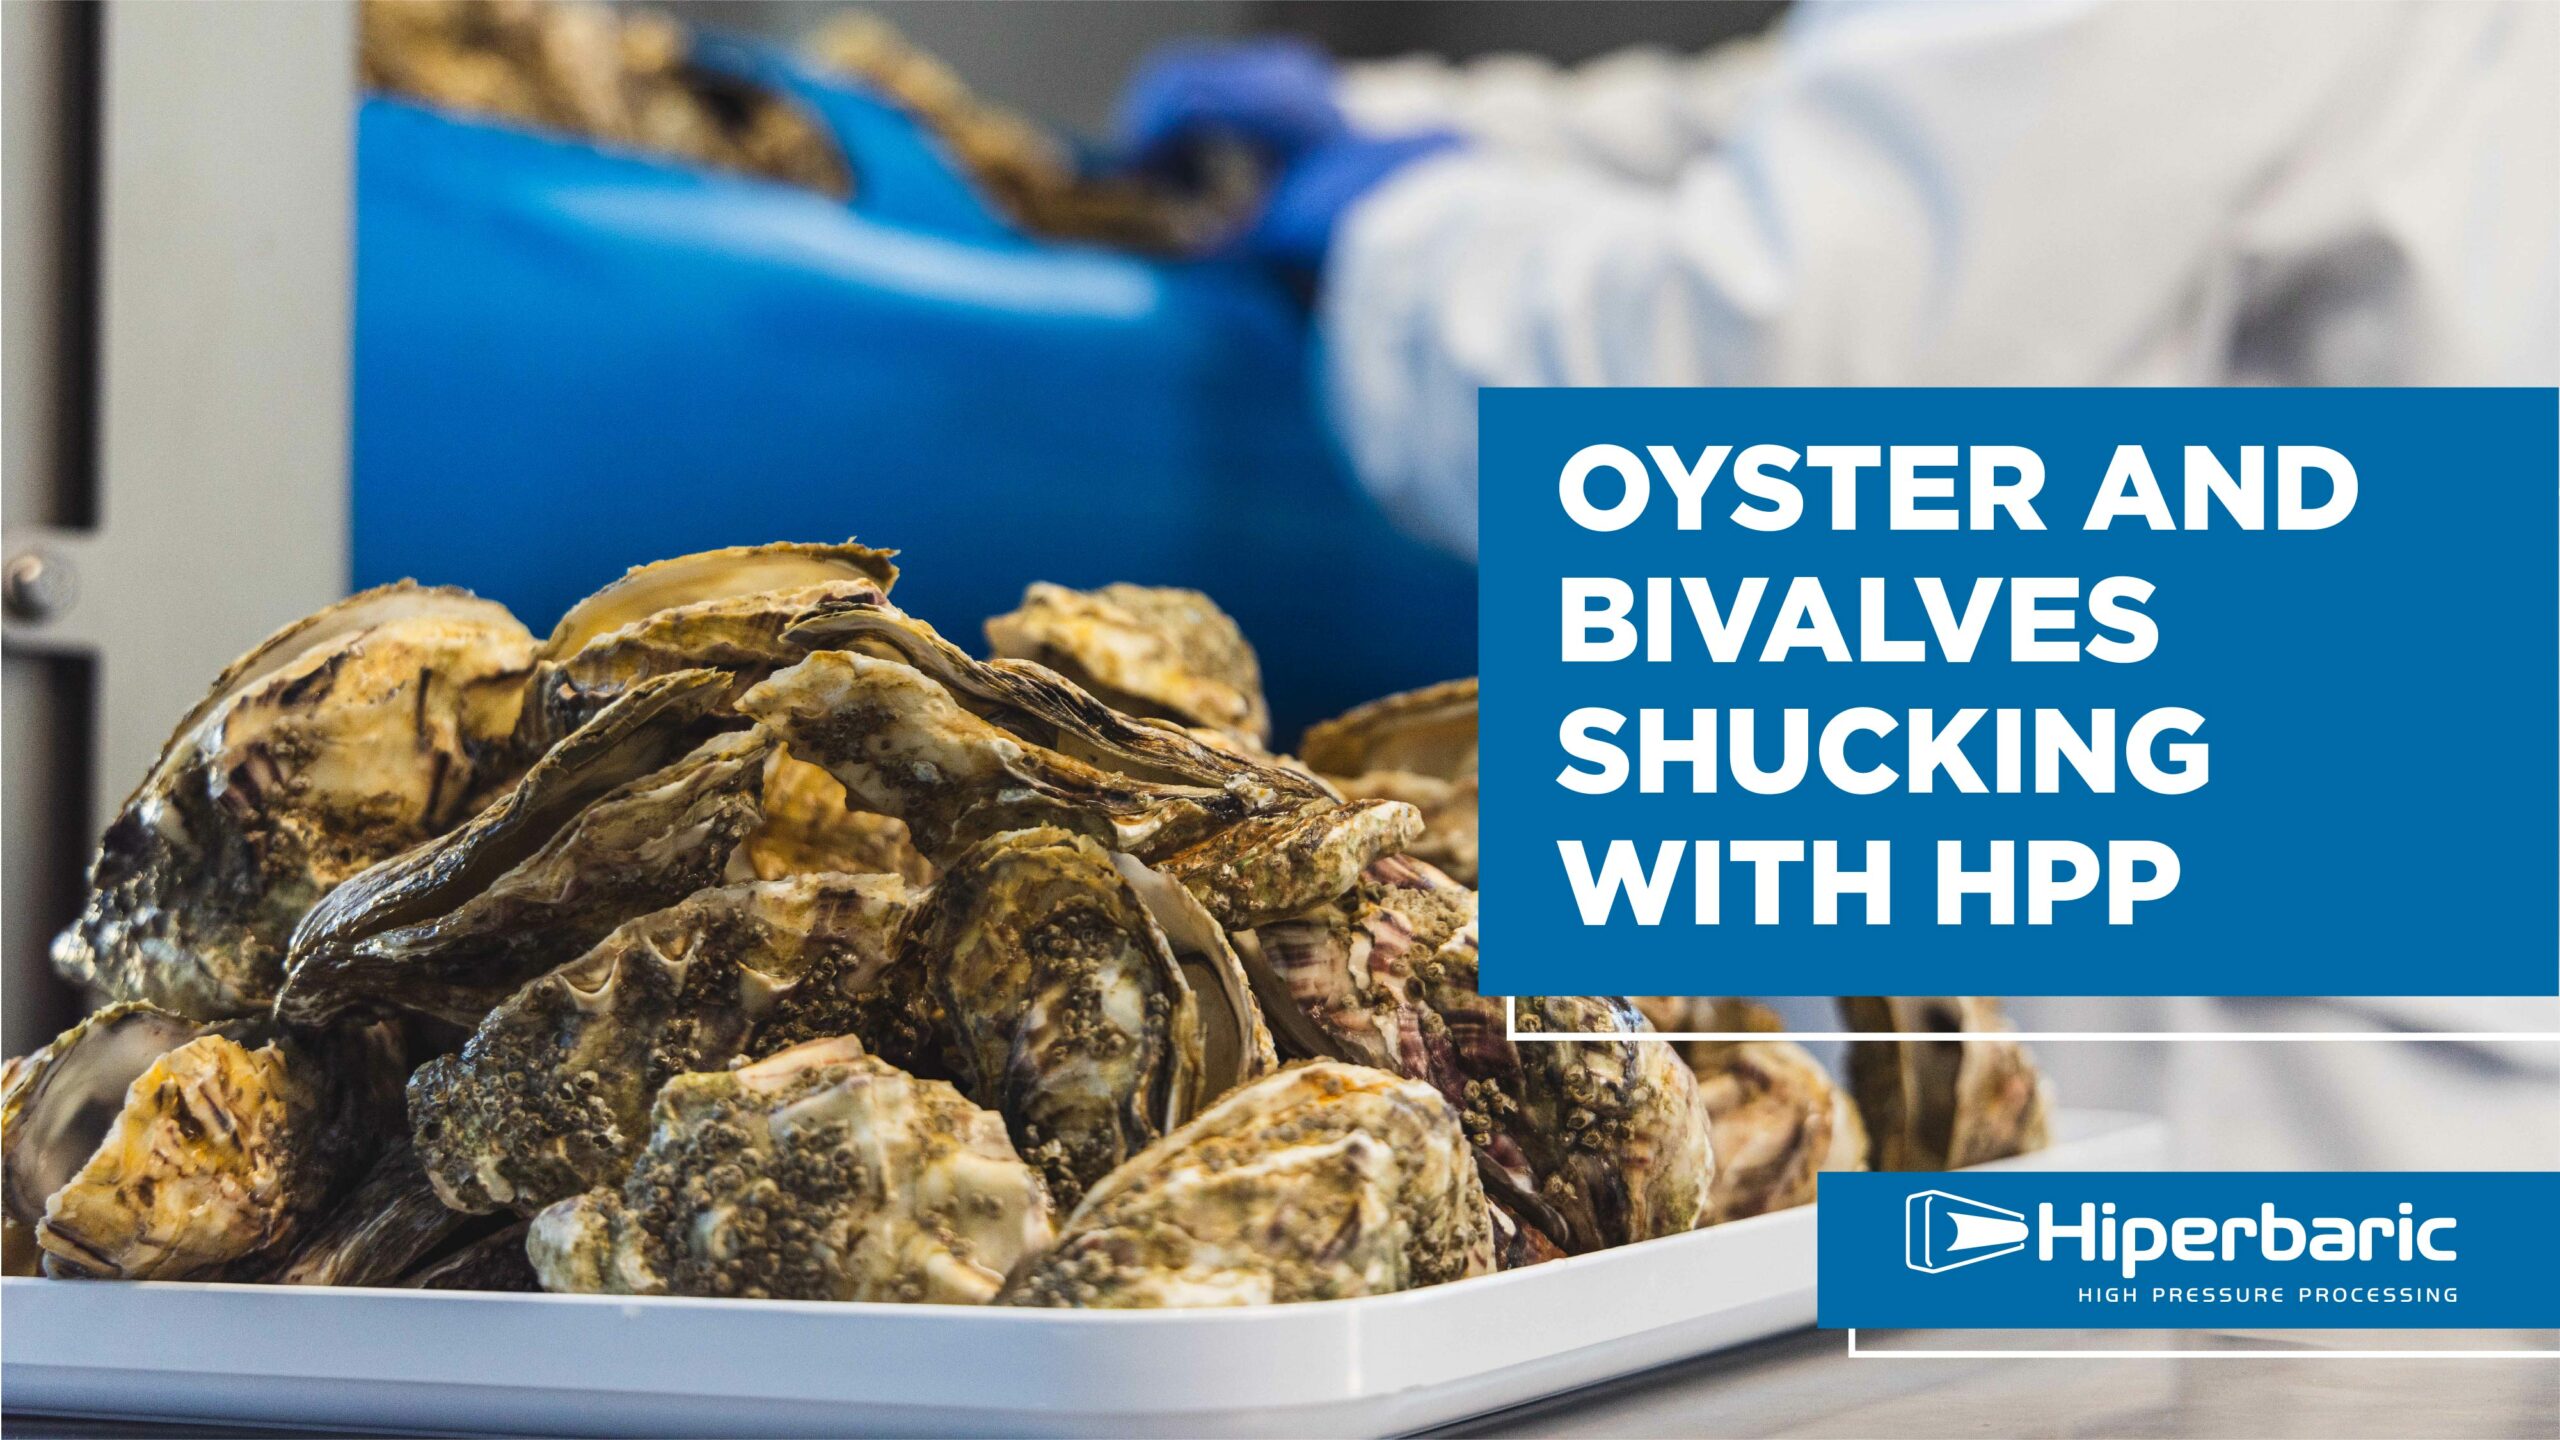 Oysters and bivalves shucking with HPP